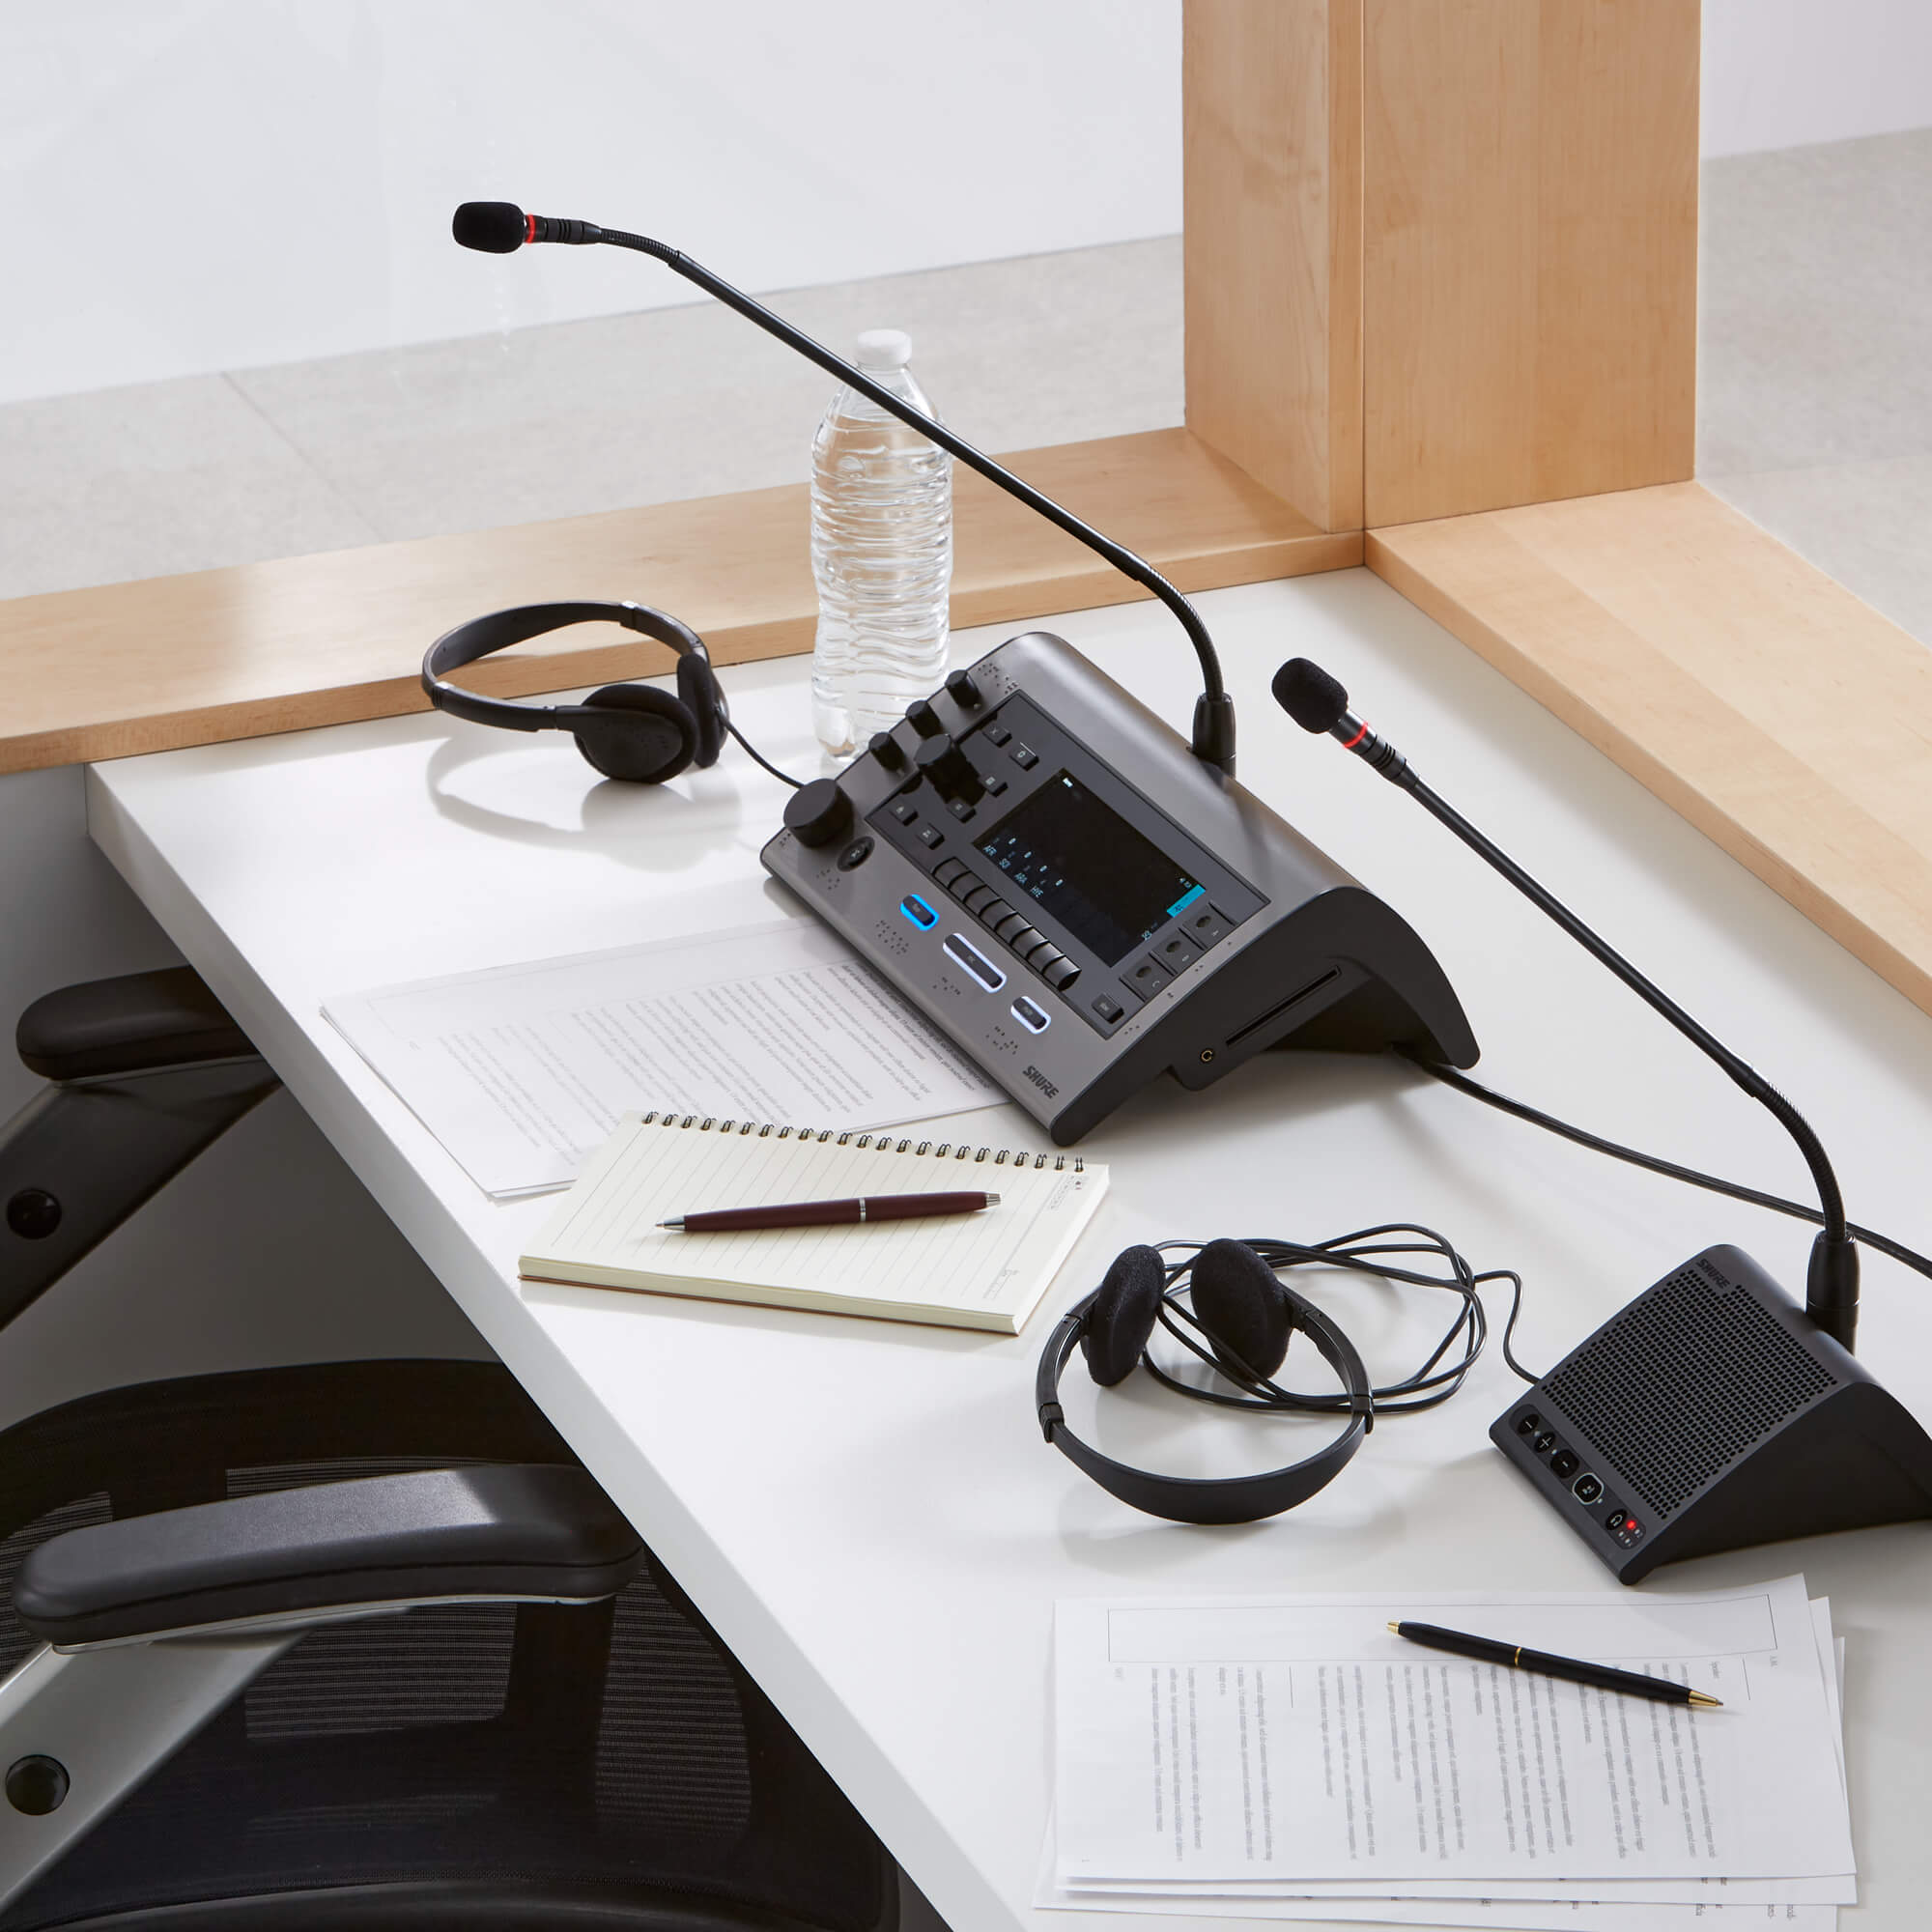 Microflex Complete Wireless - Digital Conference Systems - Shure USA